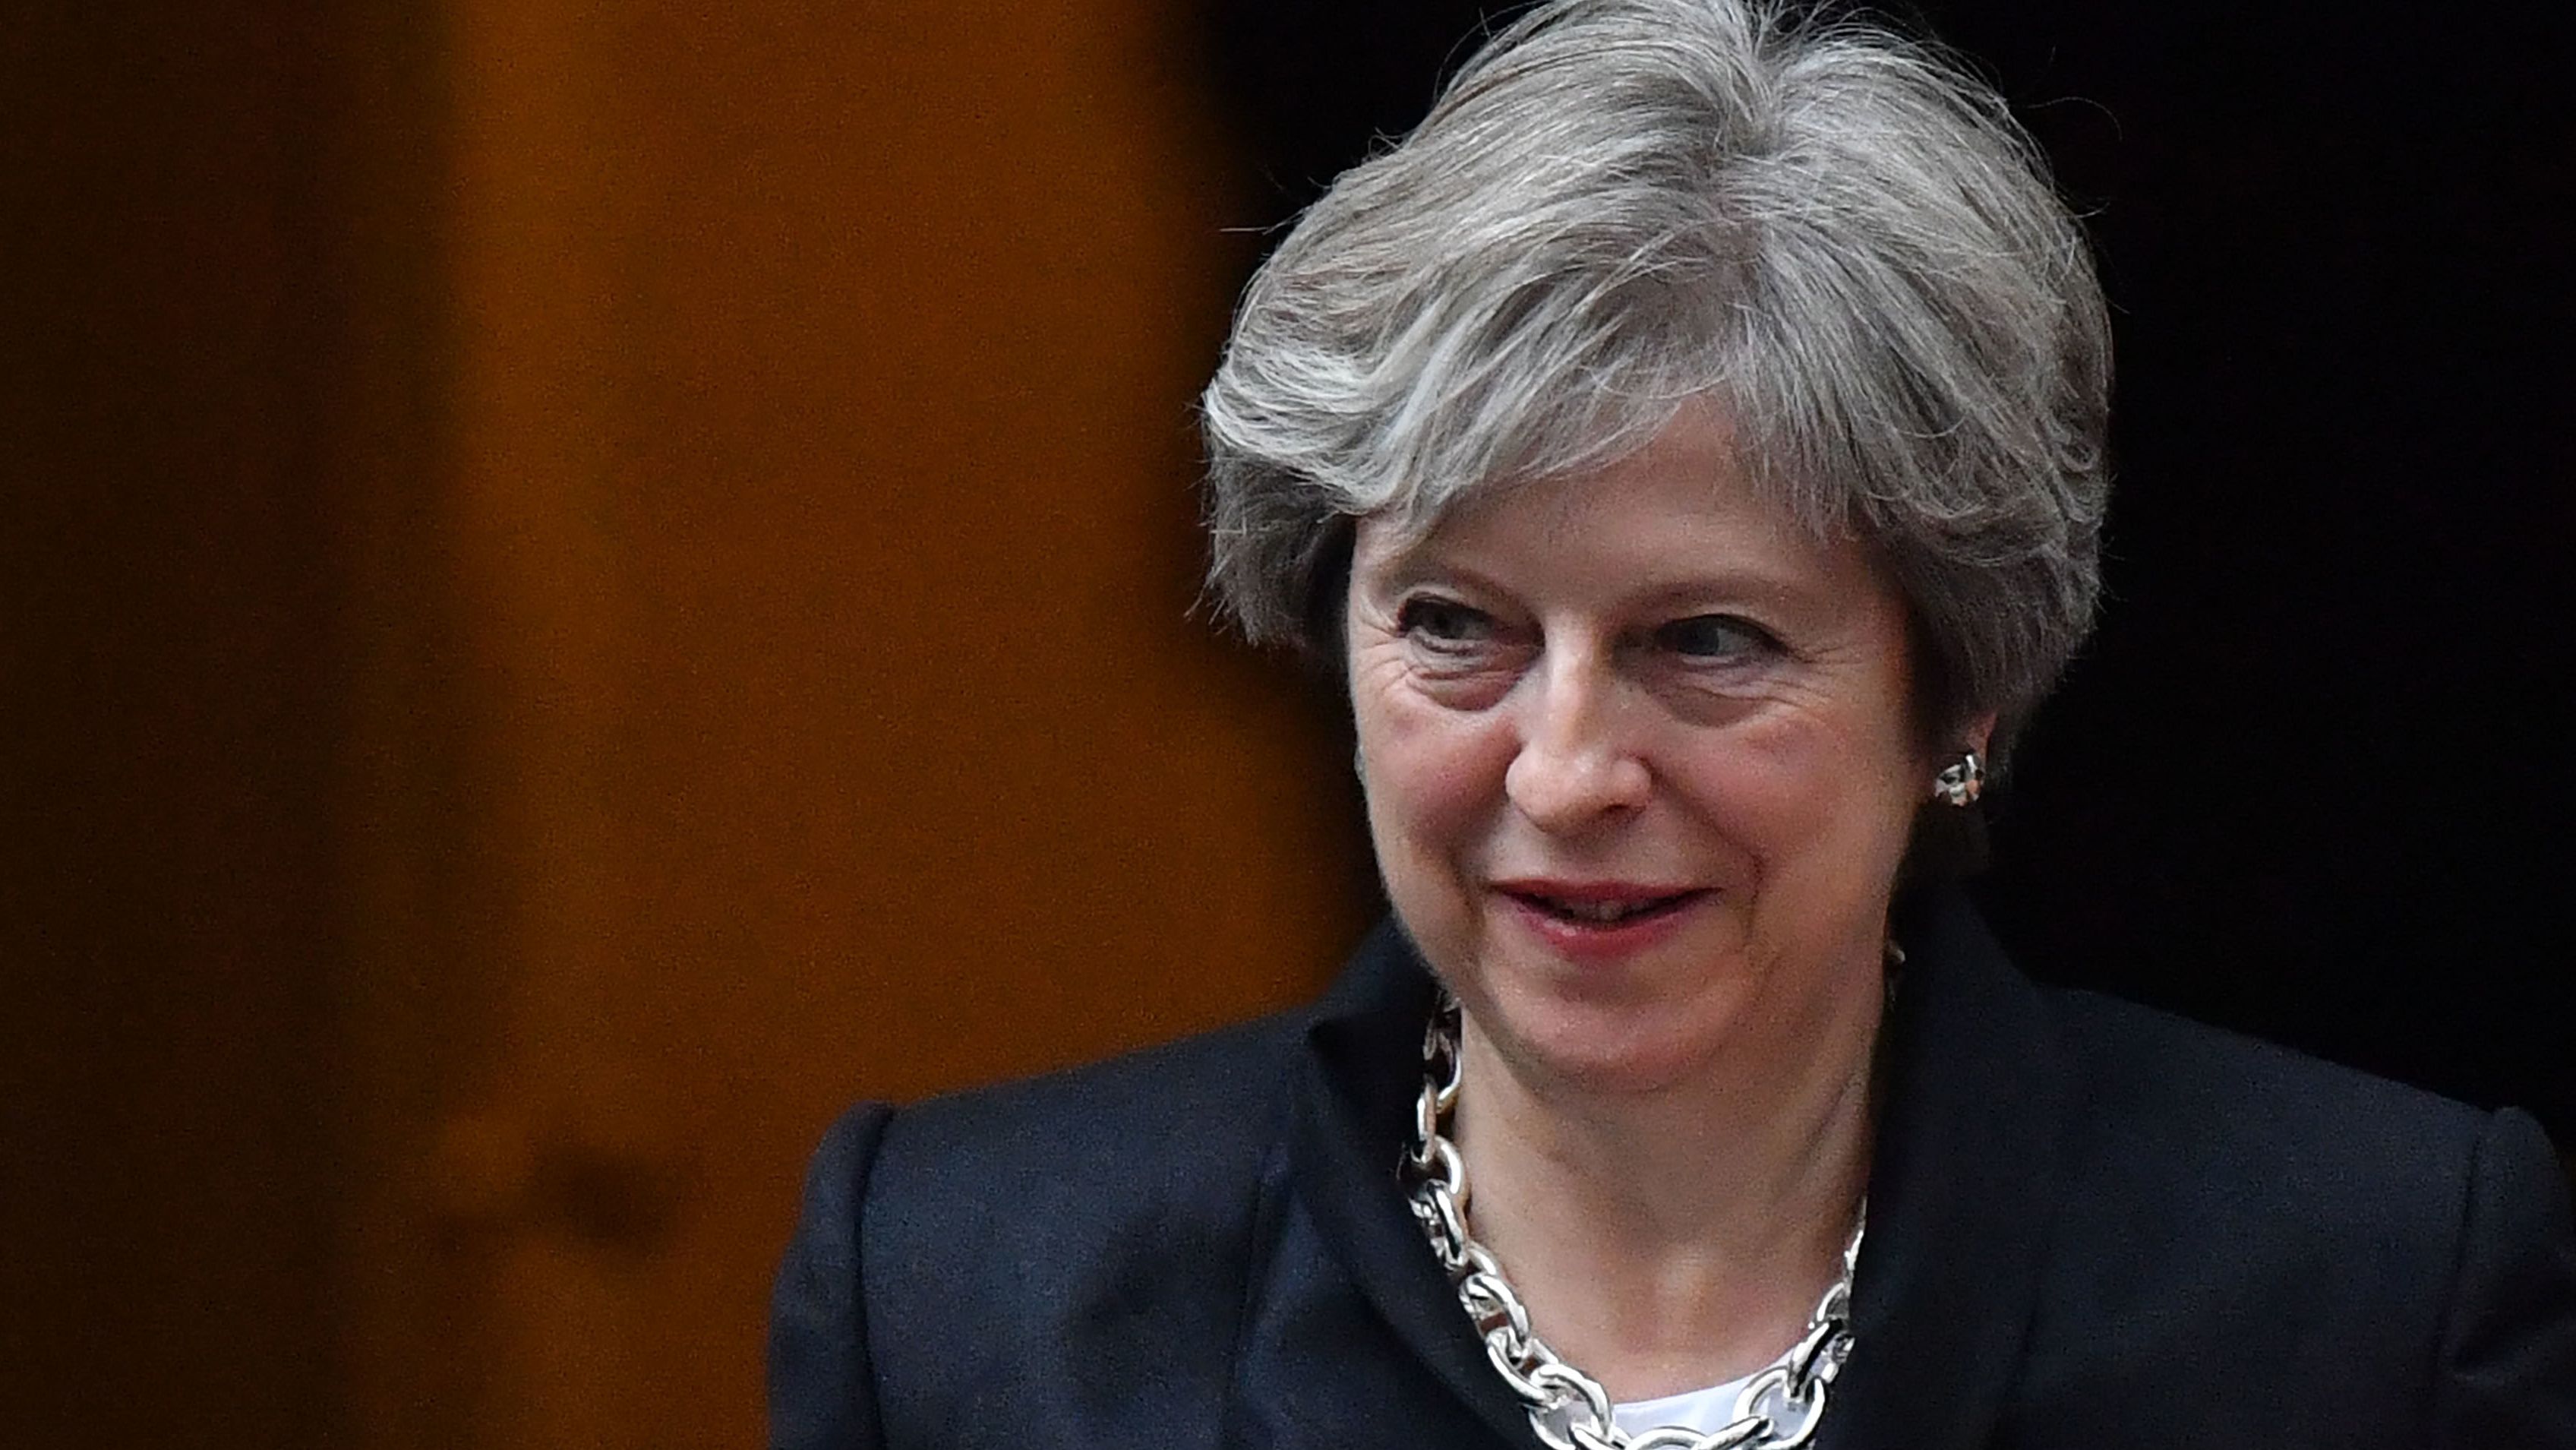 Prime Minister Theresa May faces questions over her leadership as pressure mounts on her weakened government.